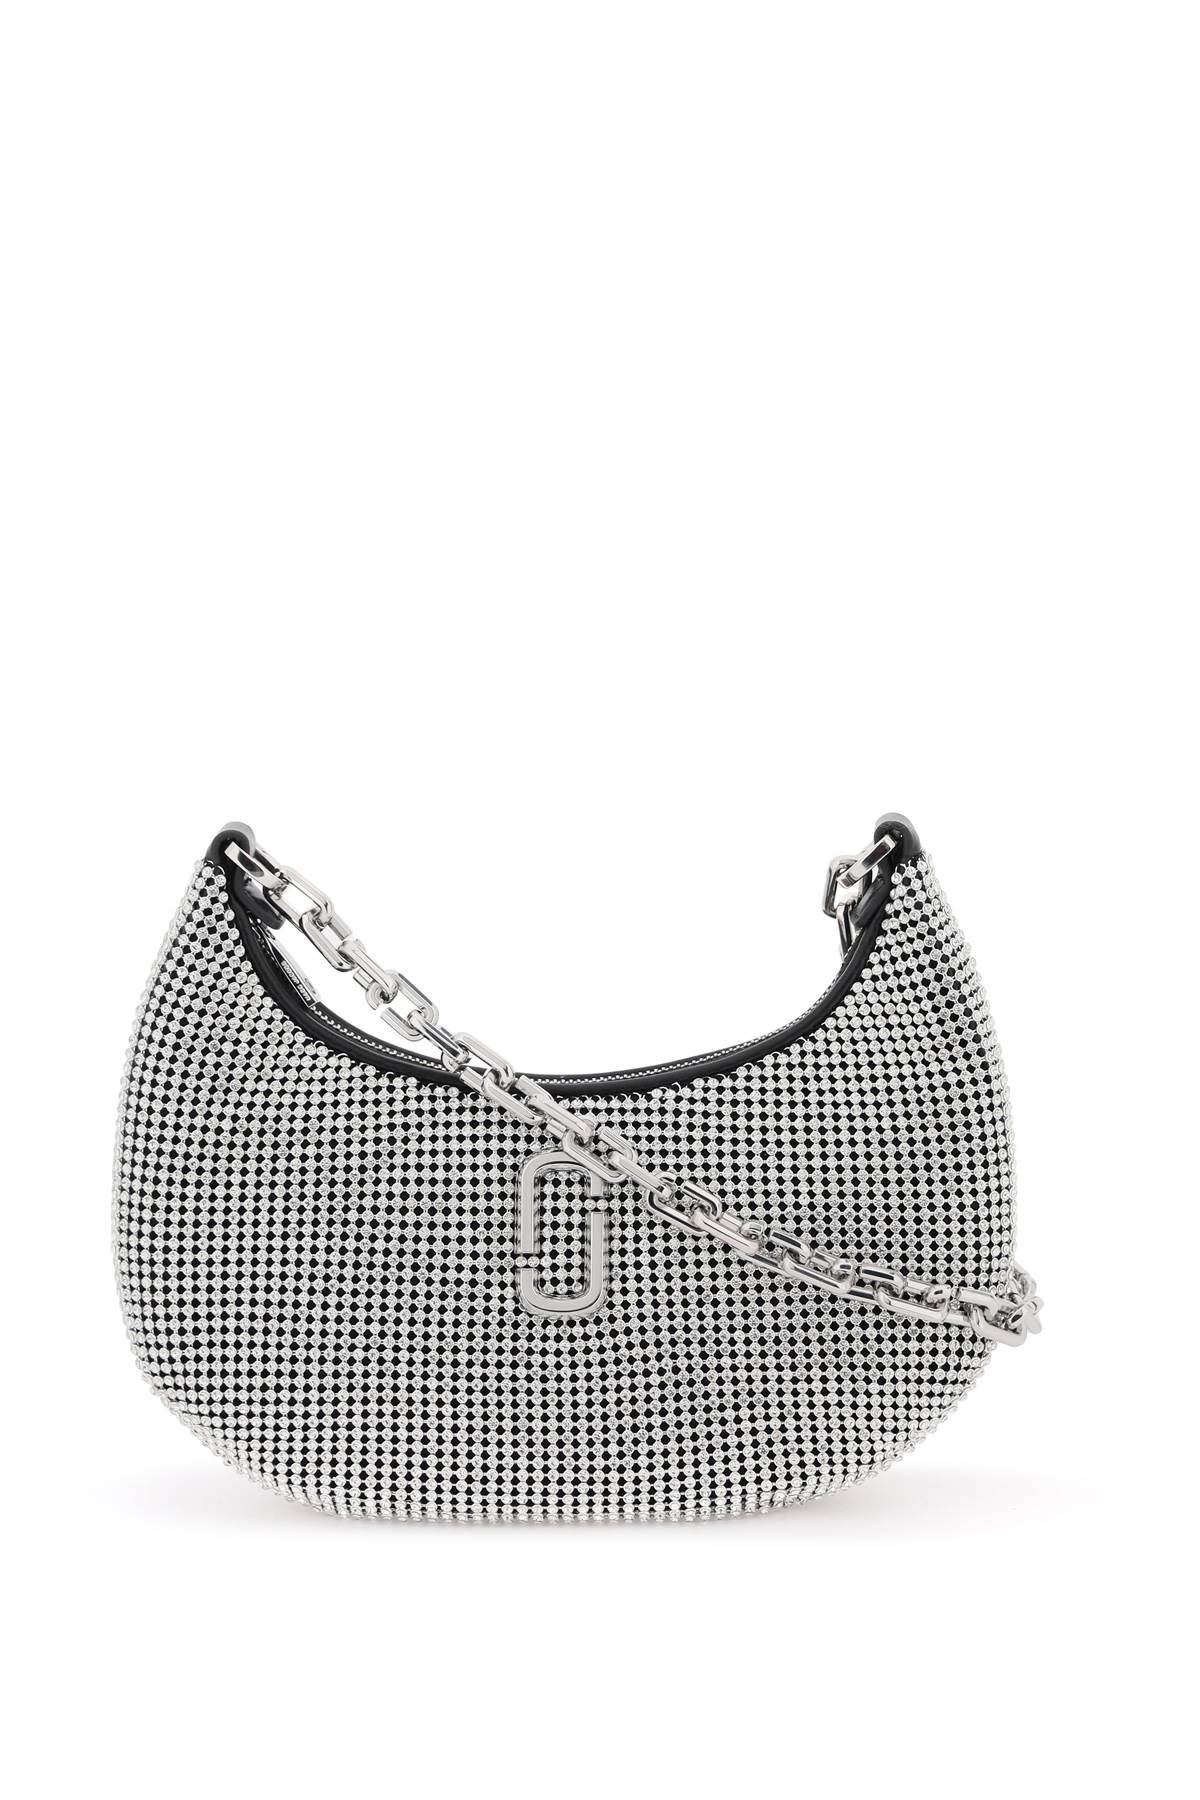 Marc Jacobs MARC JACOBS the rhinestone small curve bag